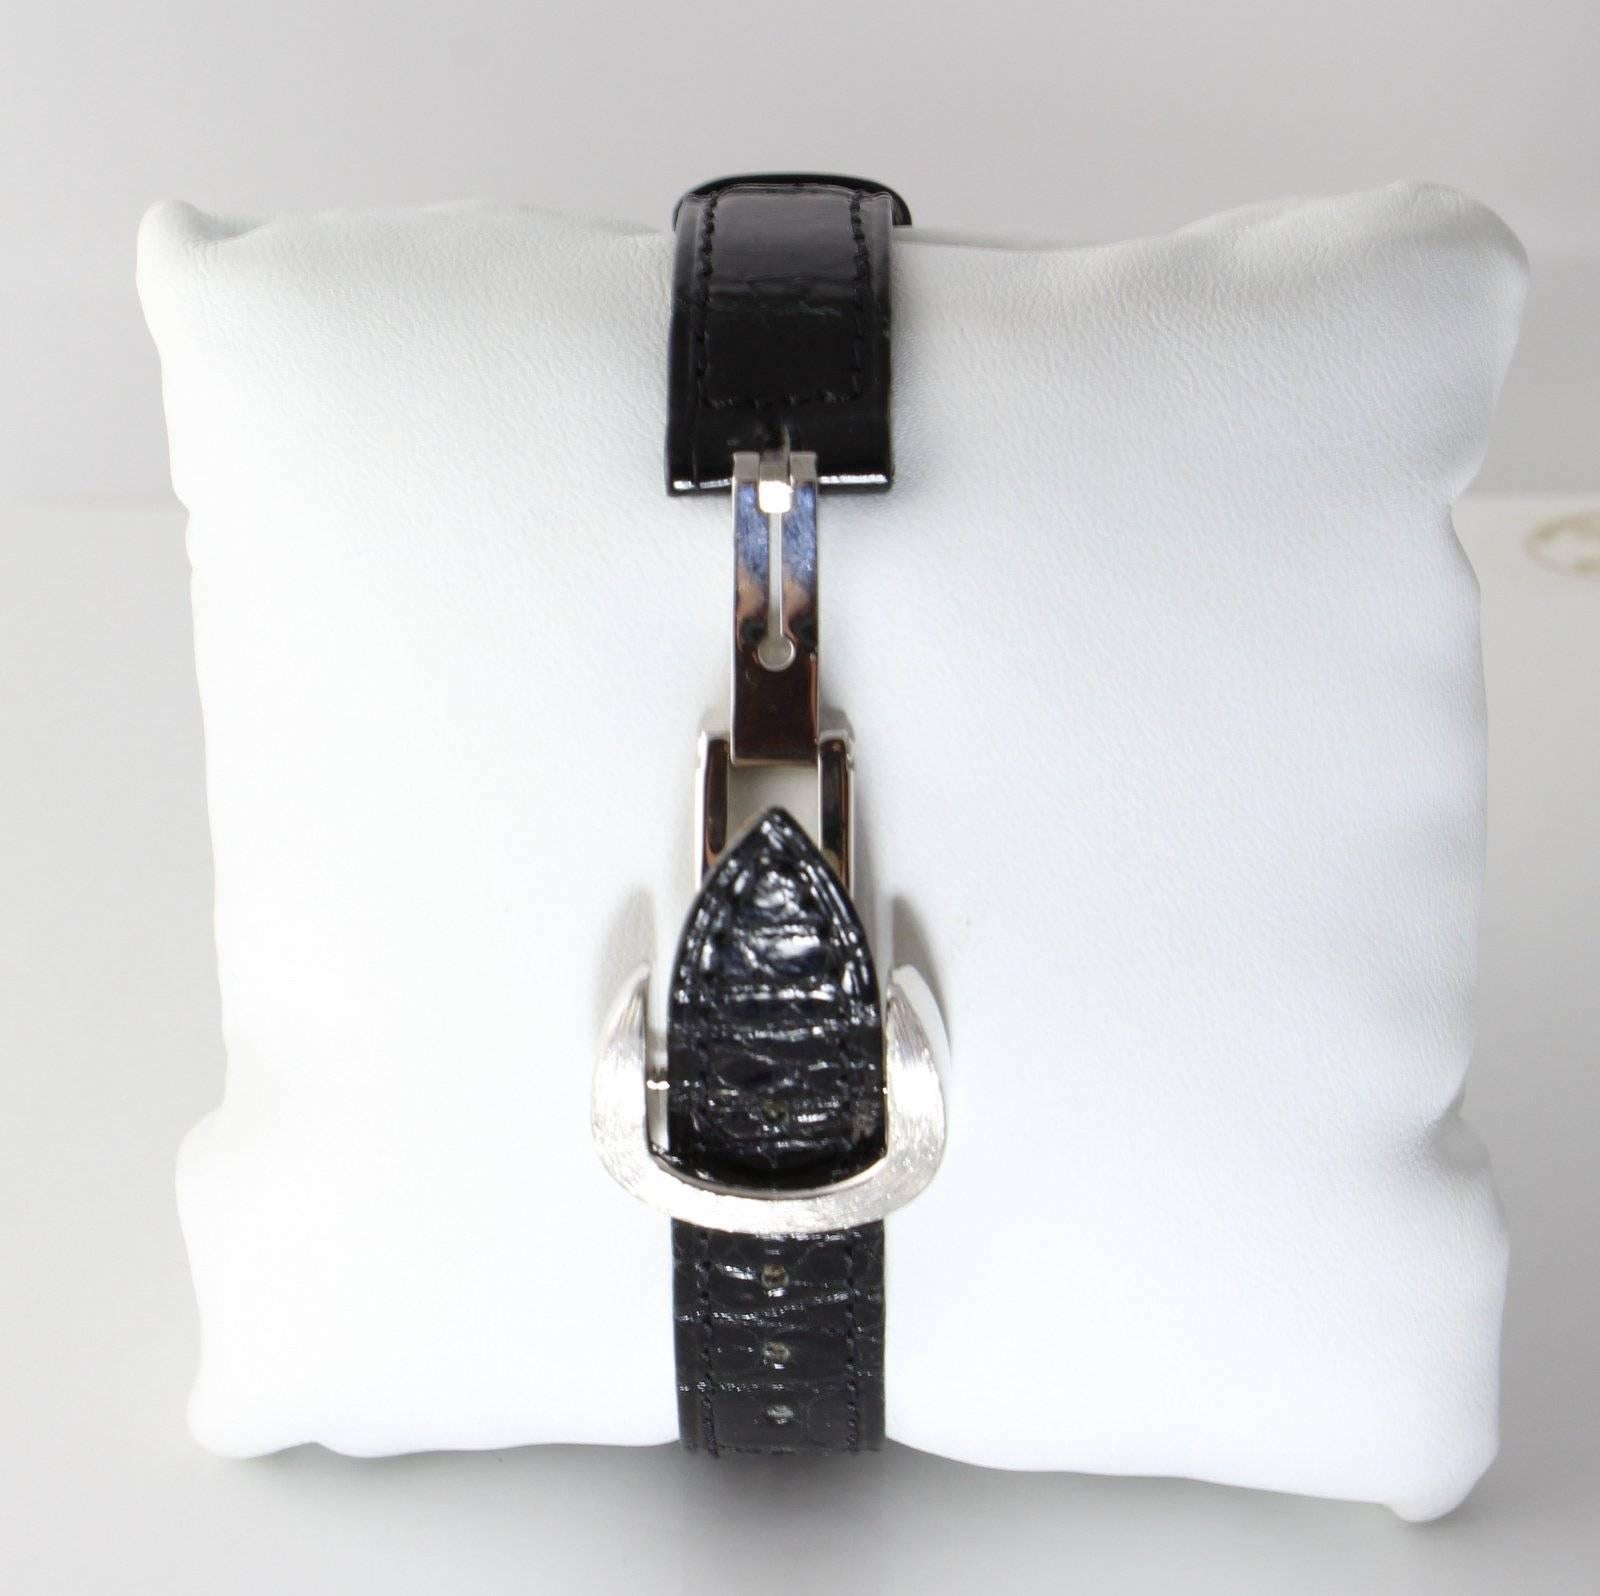 Henry Dunay 18K white gold, Sabi finish, quartz movement strap watch with diamond face on a black alligator strap with deployant buckle.
Case measures 1 1/8 inch by 7/8
Brand new, never worn
New in box, 2 year warranty
Last known retail $11,800